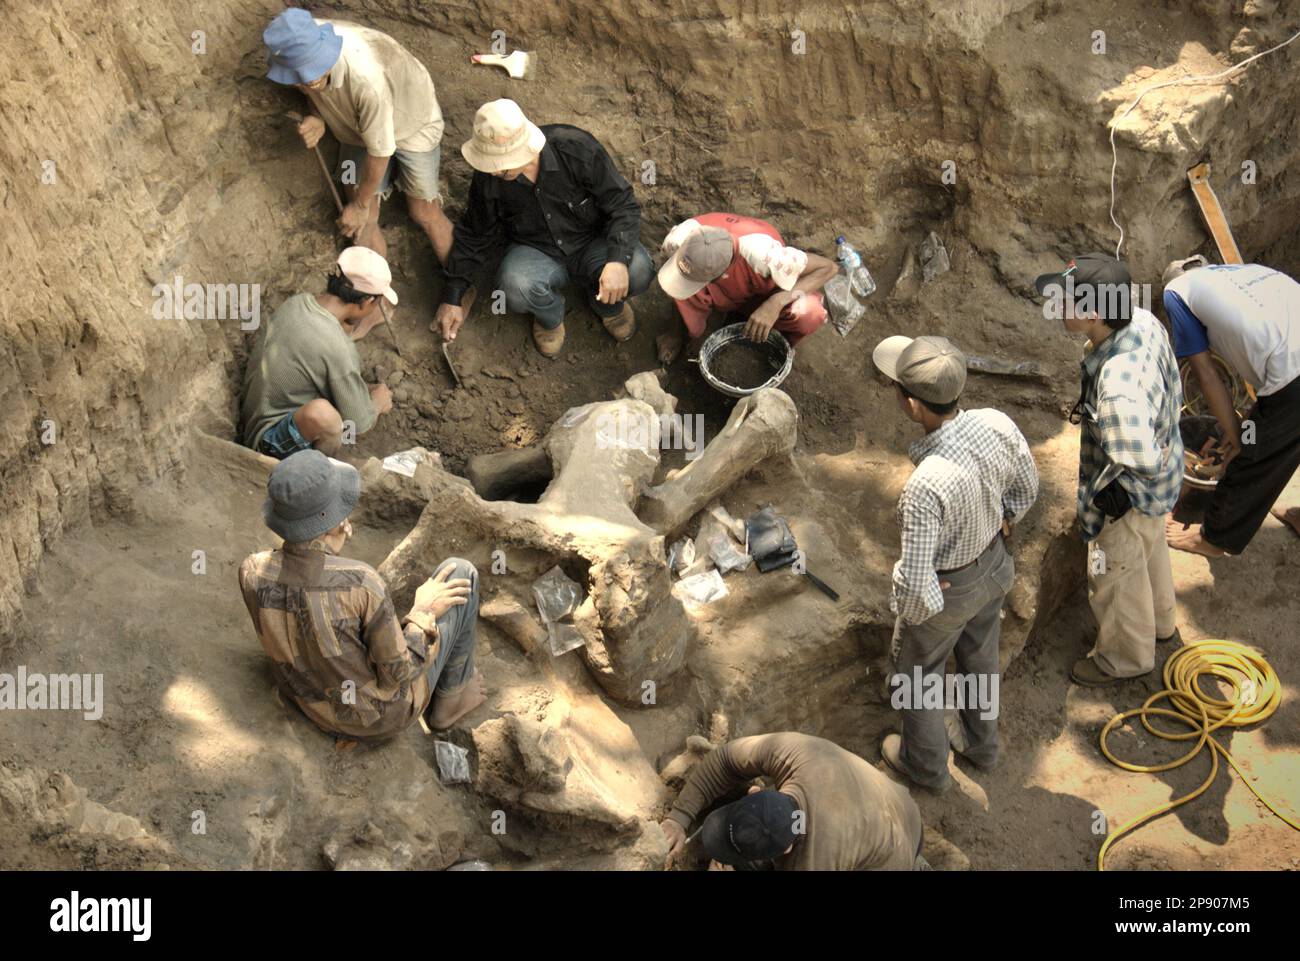 Paleontologists and villagers are working during the excavation of fossils of an extinct elephant species scientifically identified as Elephas hysudrindicus, or popularly called 'Blora elephant', in Sunggun, Mendalem, Kradenan, Blora, Central Java, Indonesia. During the excavation, a team of scientists from Vertebrate Research (Geological Agency, Indonesian Ministry of Energy and Mineral Resources) led by paleontologists Iwan Kurniawan and Fachroel Aziz discovered the species' bones almost entirely (around 90 percent) that later would allow them to build a scientific reconstruction, which is.. Stock Photo